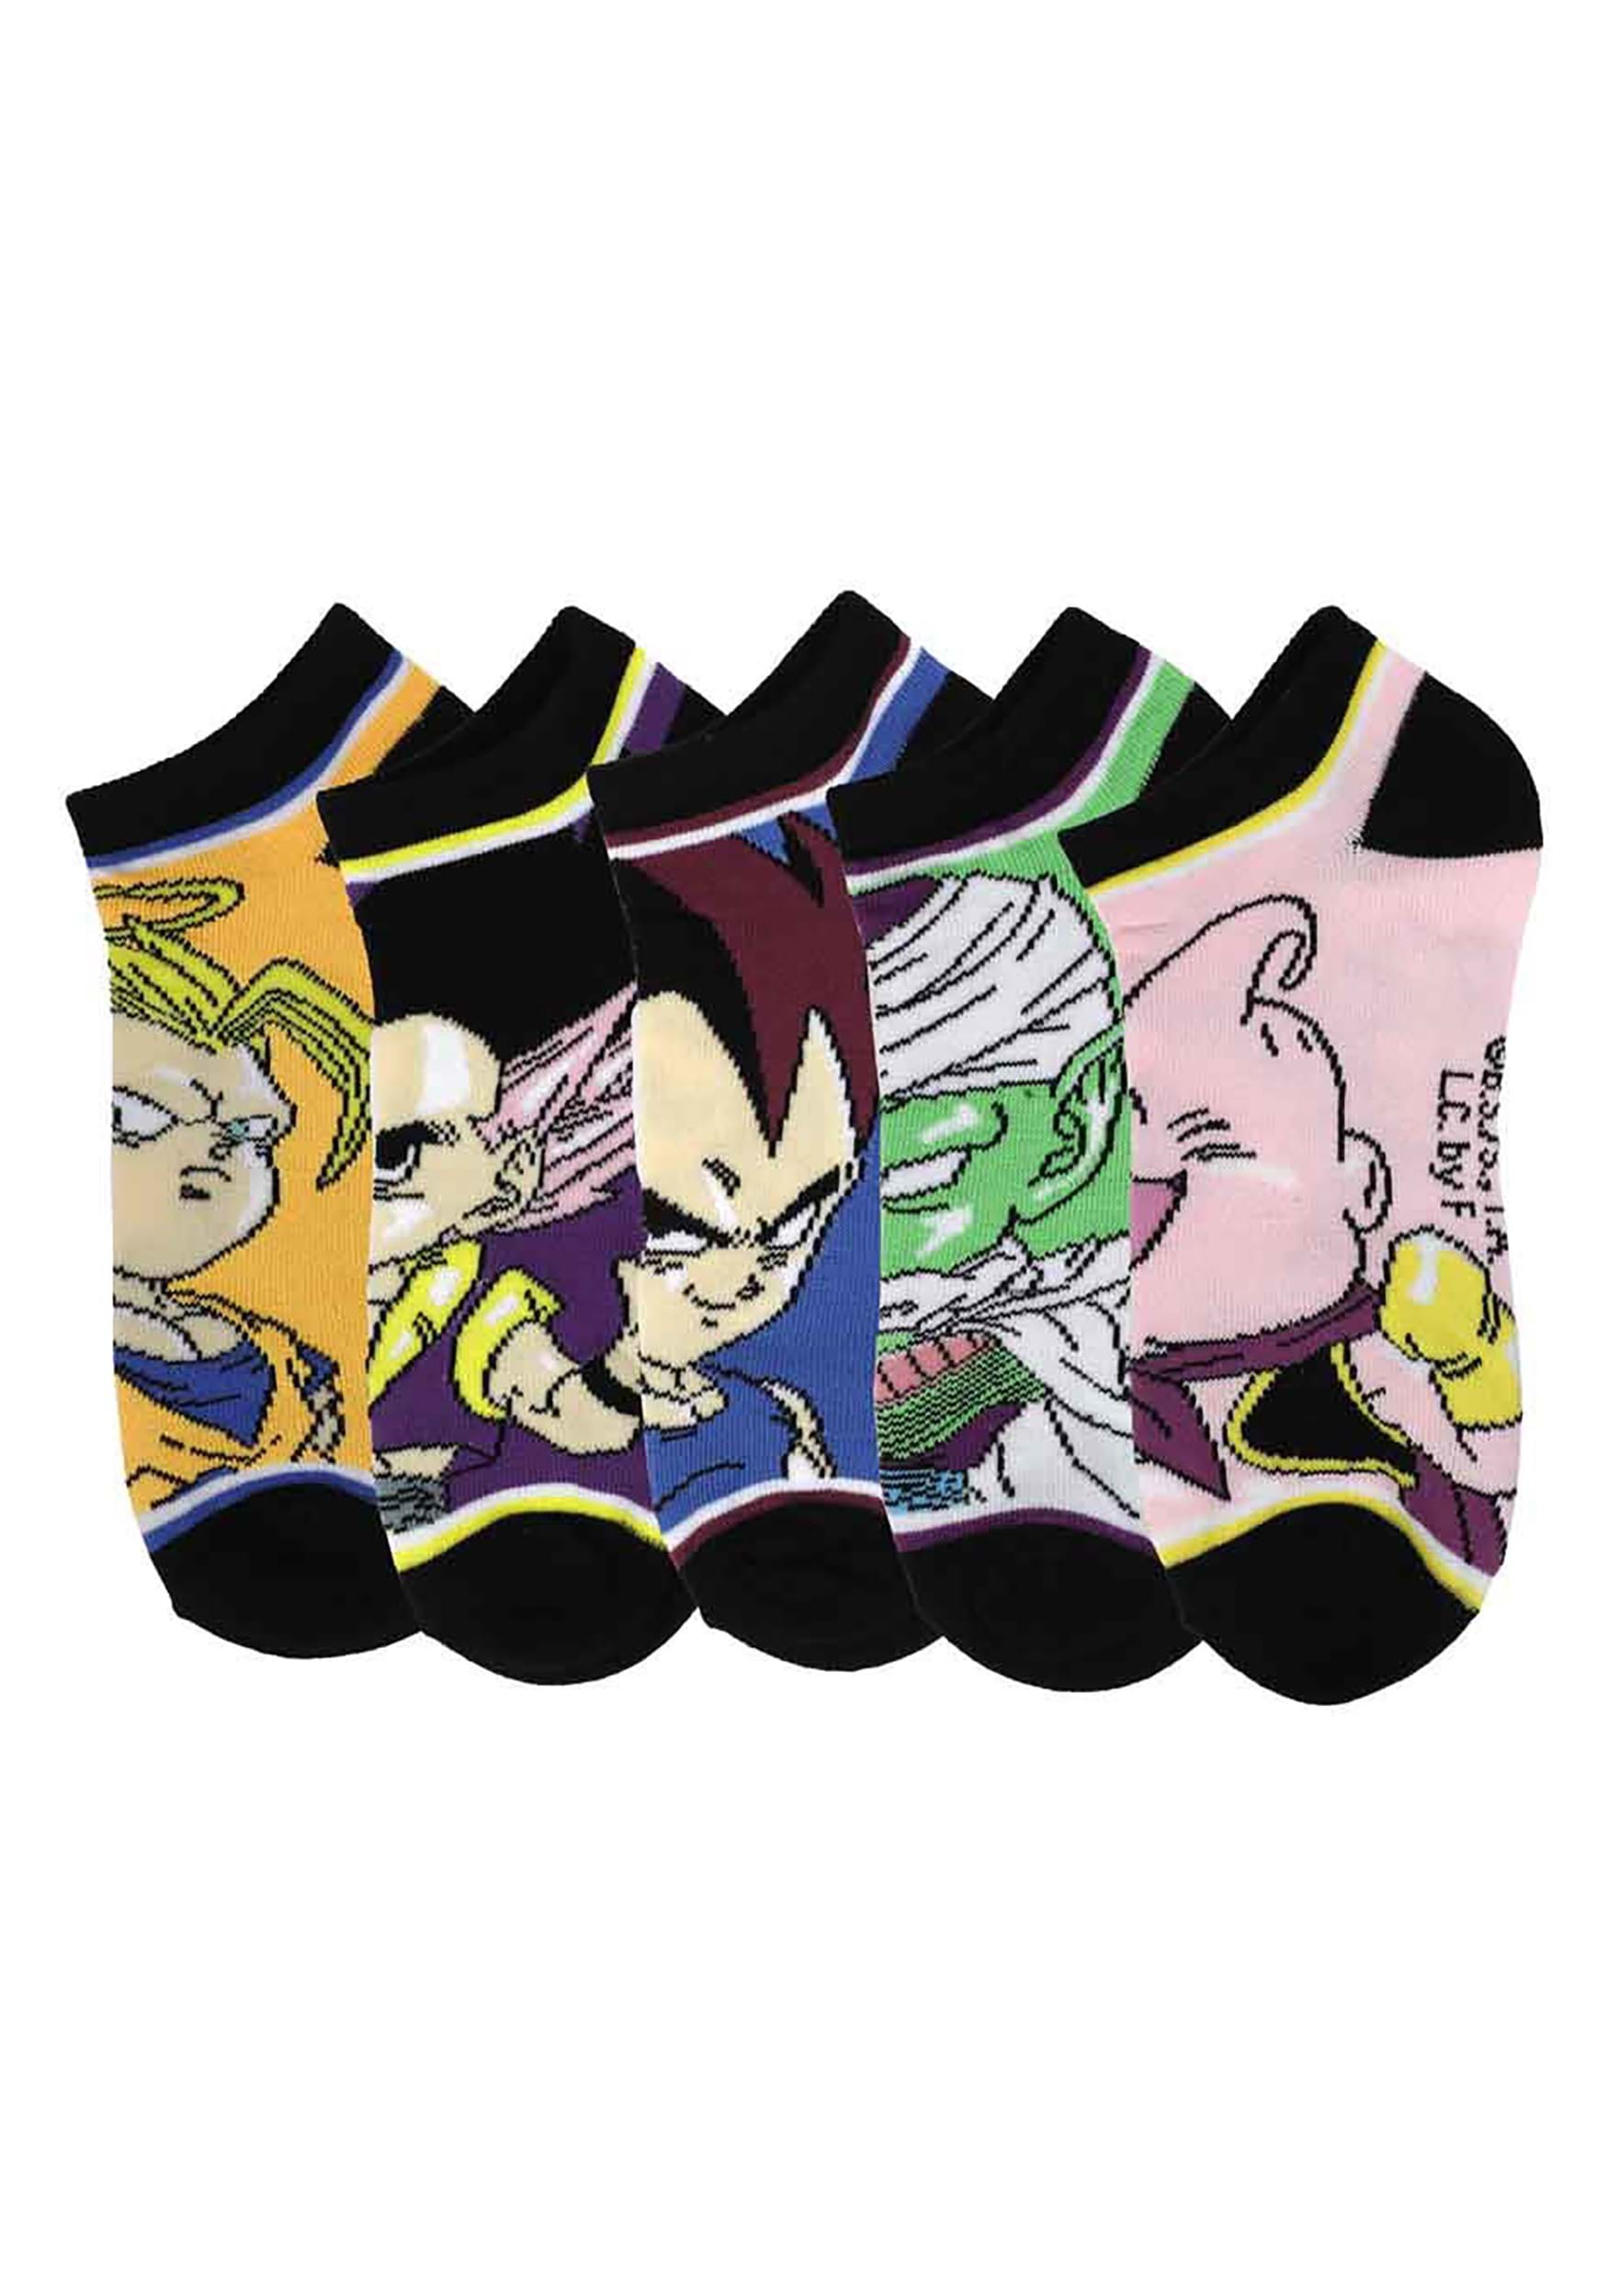 Dragon Ball Z Characters 5 Pair Ankle Socks